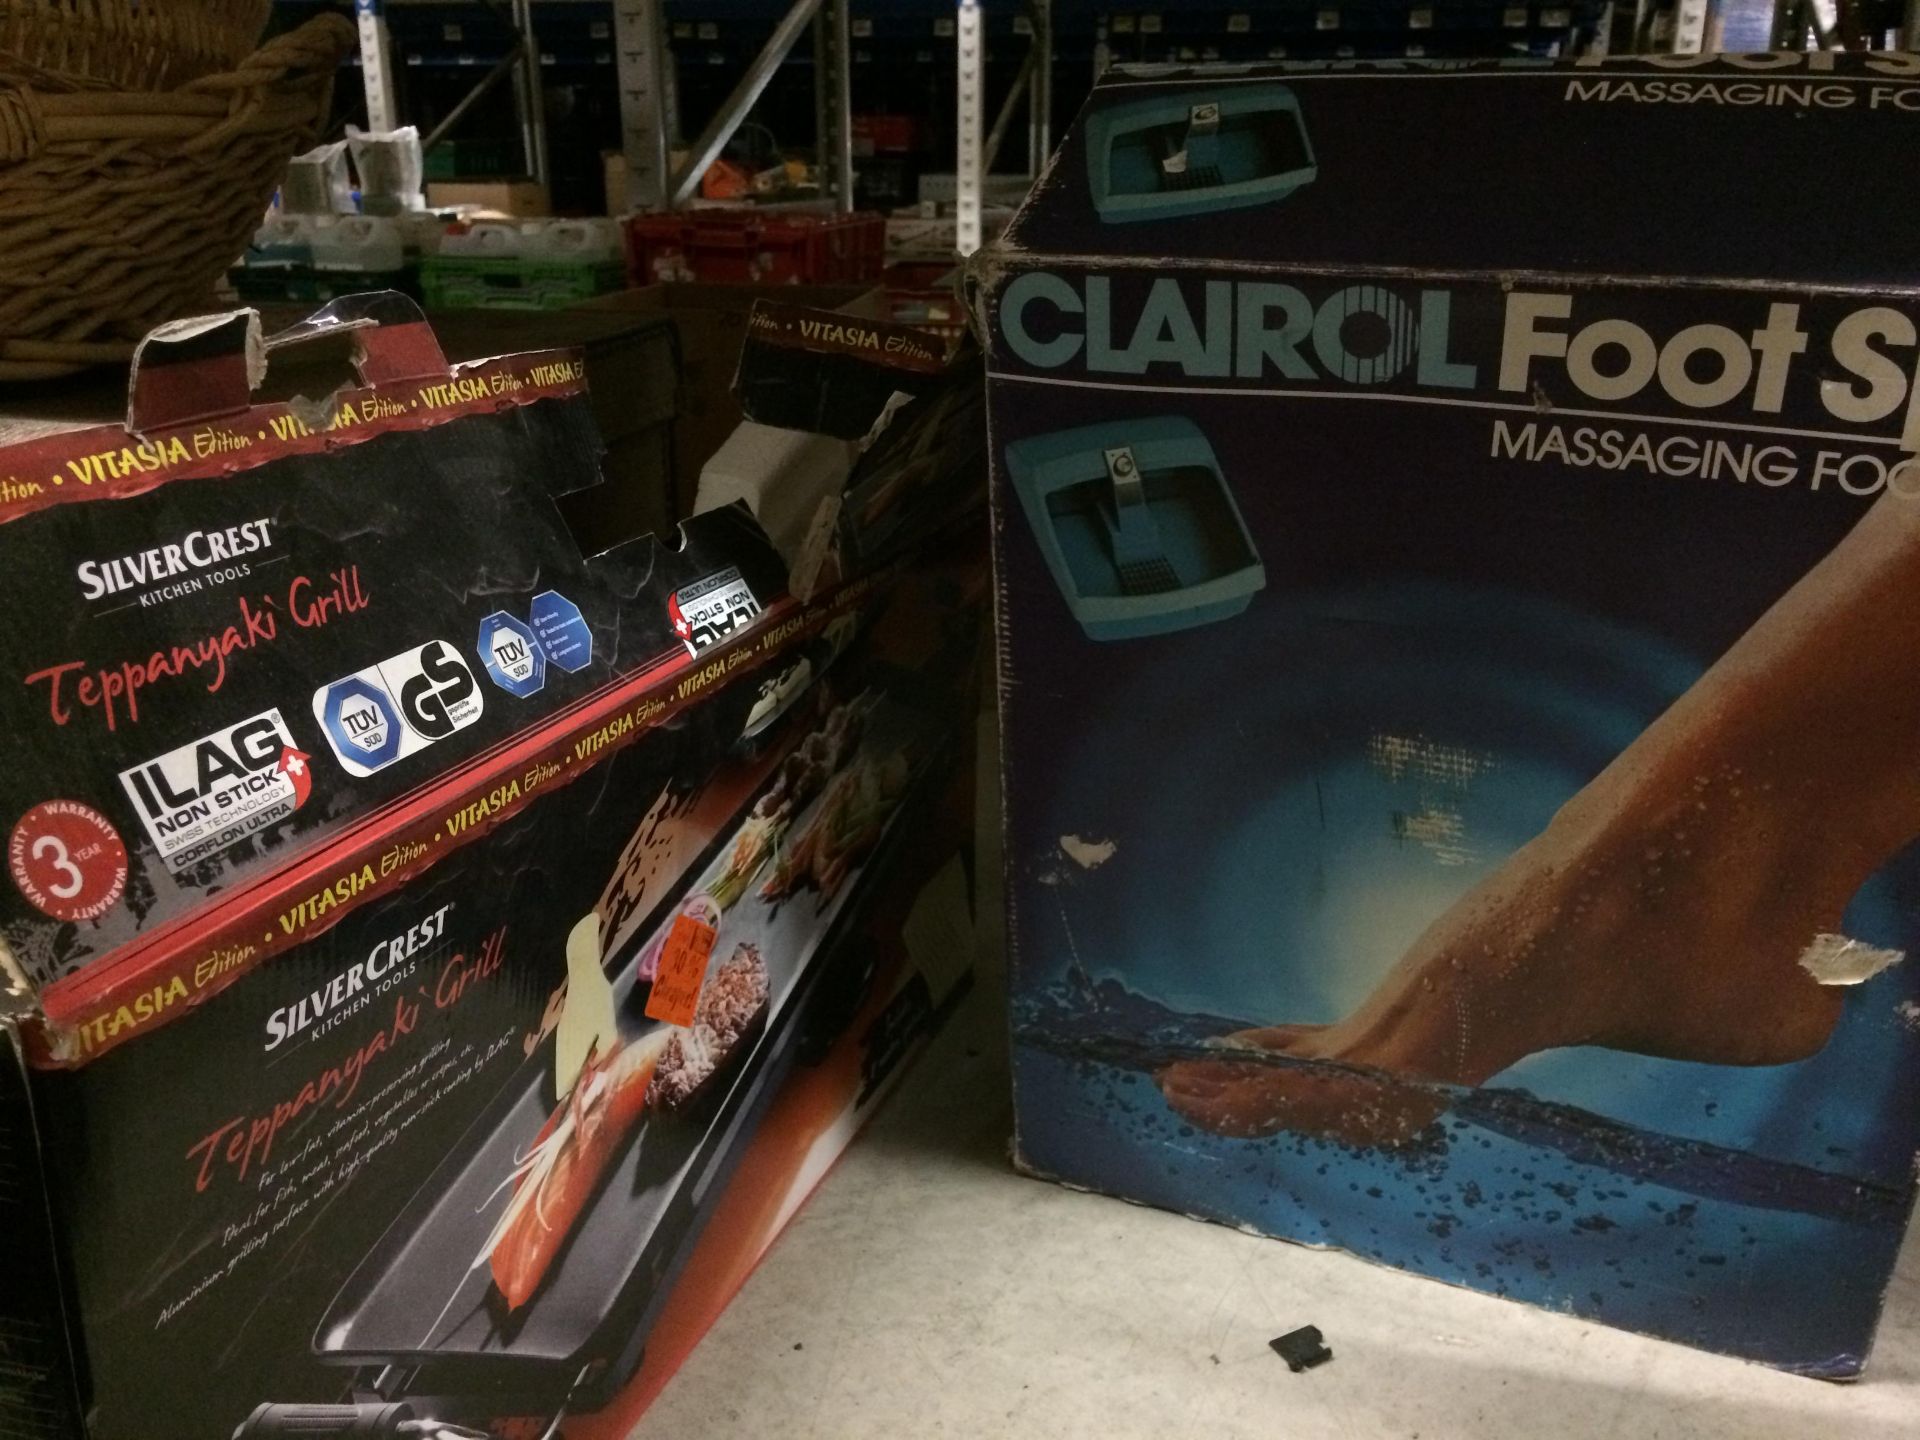 Two items - a Clairol foot spa and a Silvercrest Teppanyaki grill - Image 2 of 2